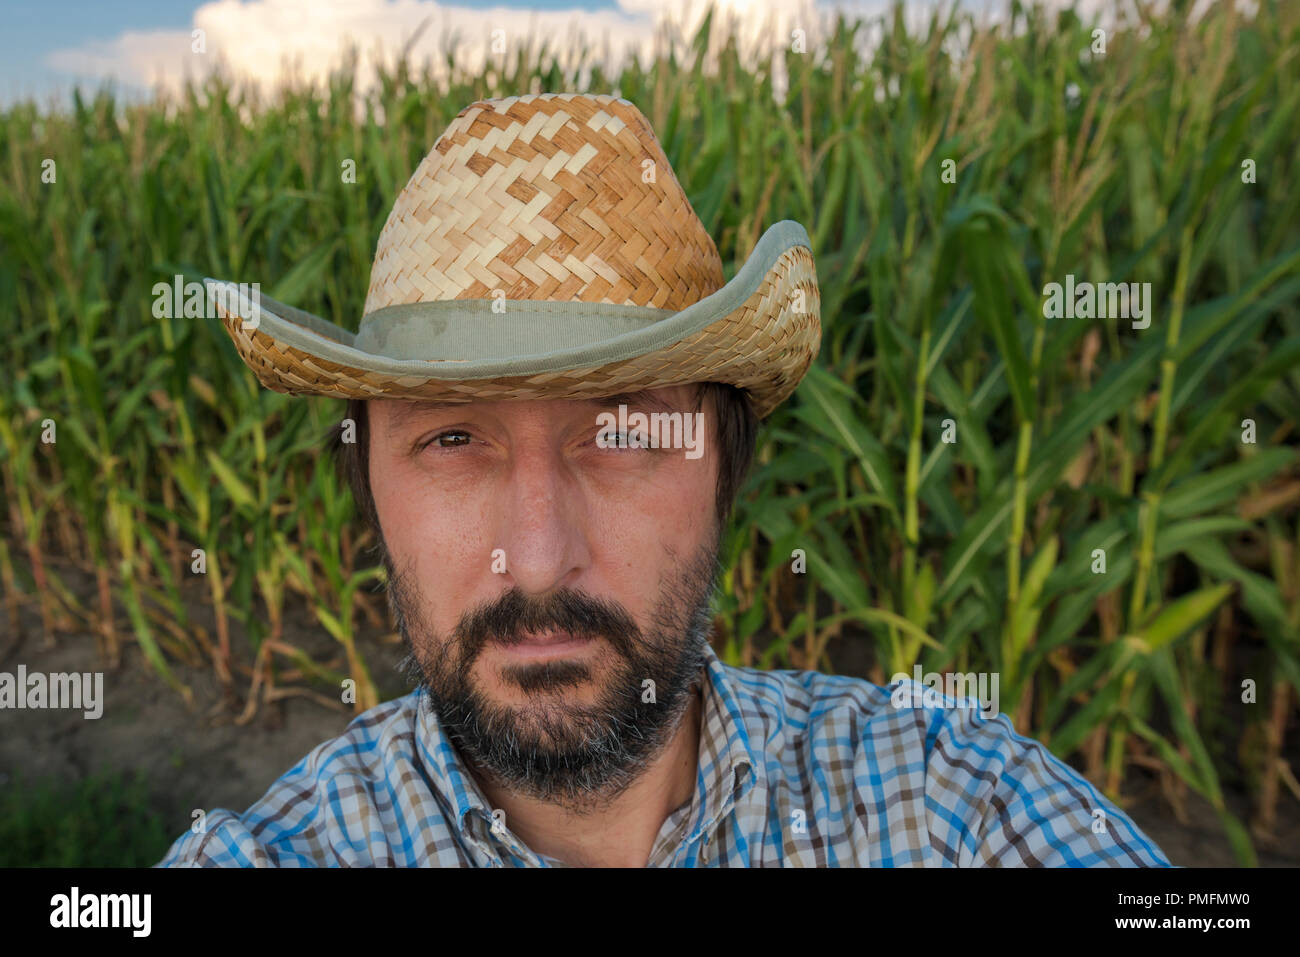 Farmer making selfie portrait in corn field, proud and satisfied with growth of his crops Stock Photo